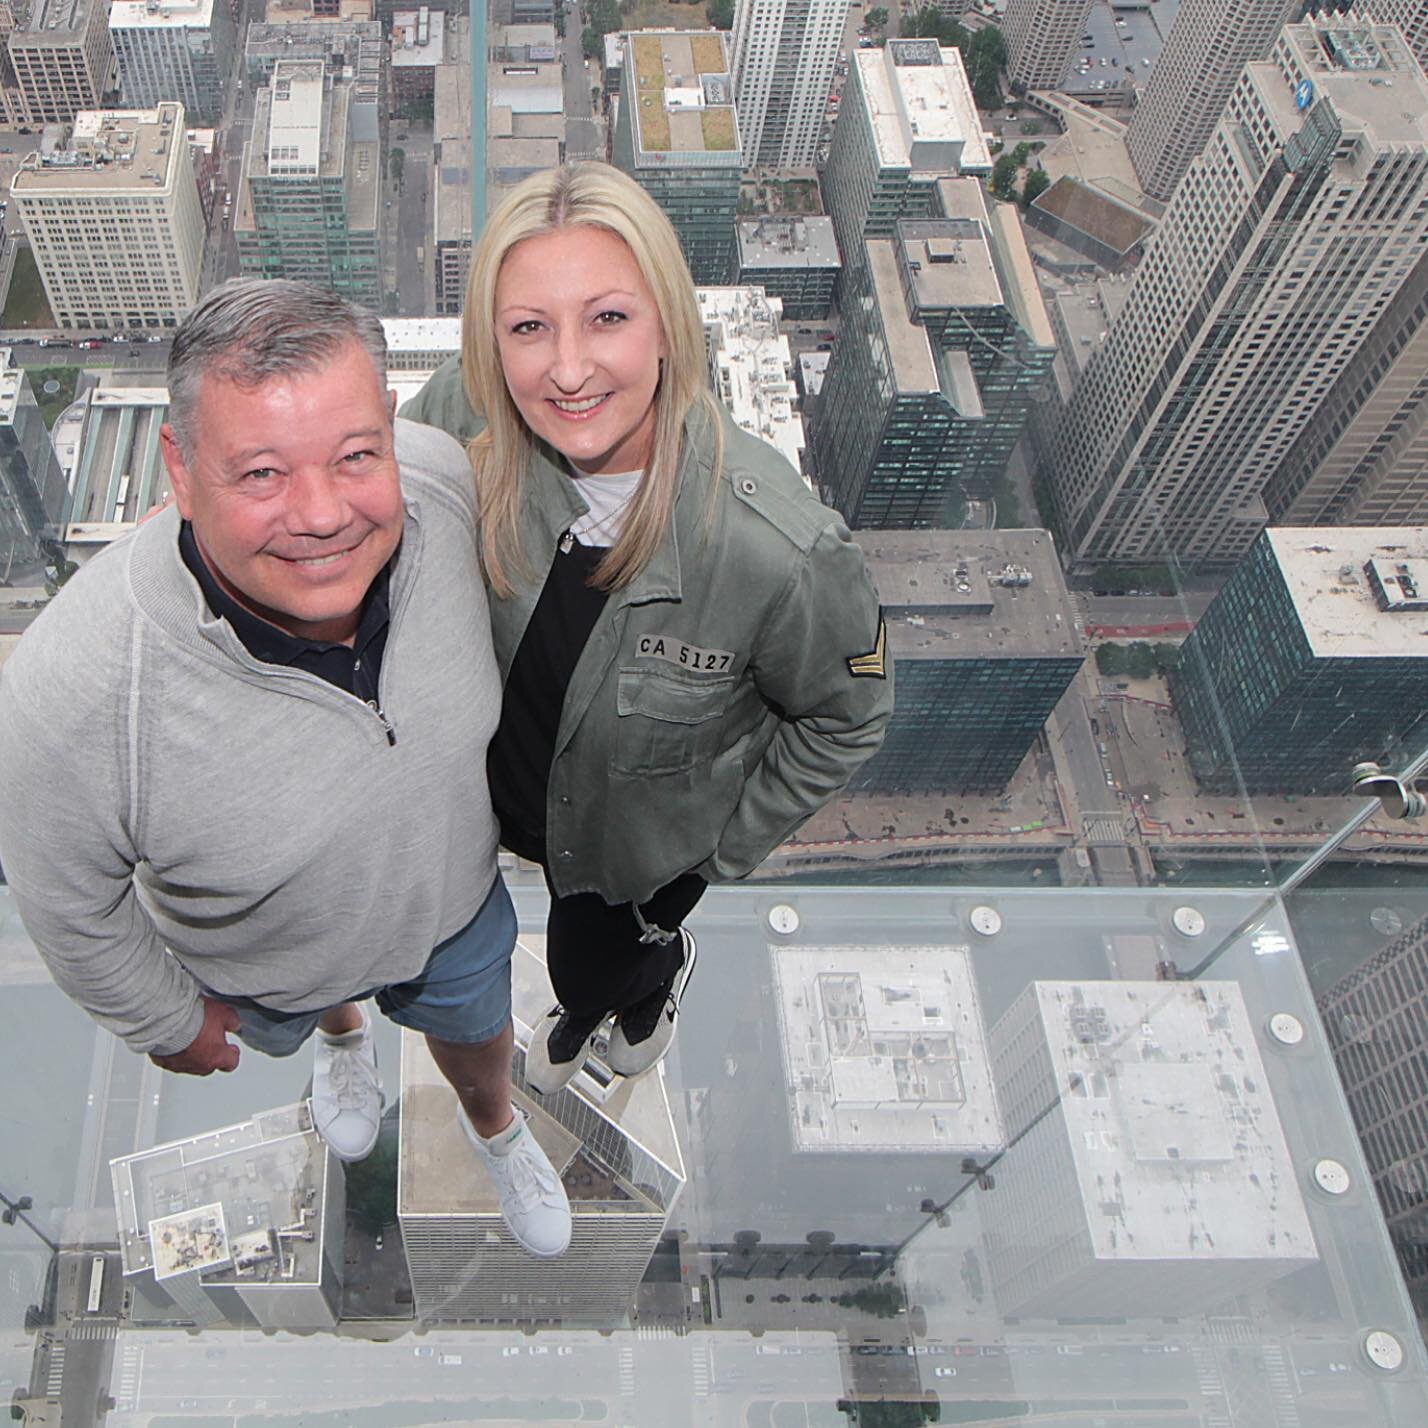 That Friday high 🙌 and a big thanks to @skydeckchicago for always rolling out the red carpet and being so incredibly hospitable to us when we bring media and influencers through their door. Always a fun visit! 🙌

#fridayfeeling #lookingup 
#skydeck